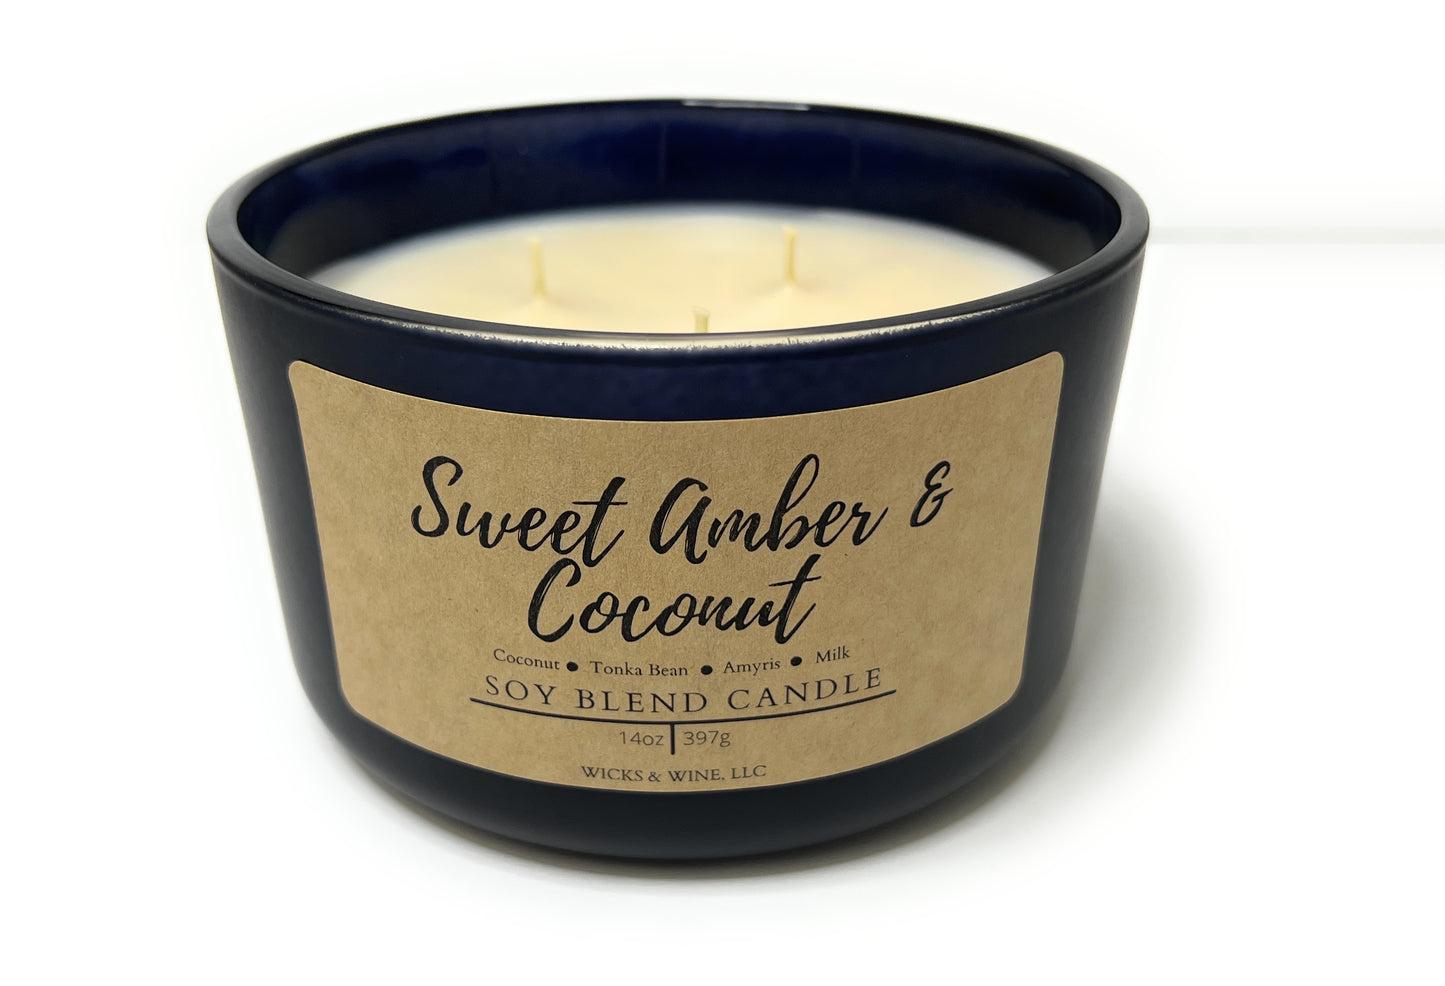 Sweet Amber & Coconut 3 Wick Candle